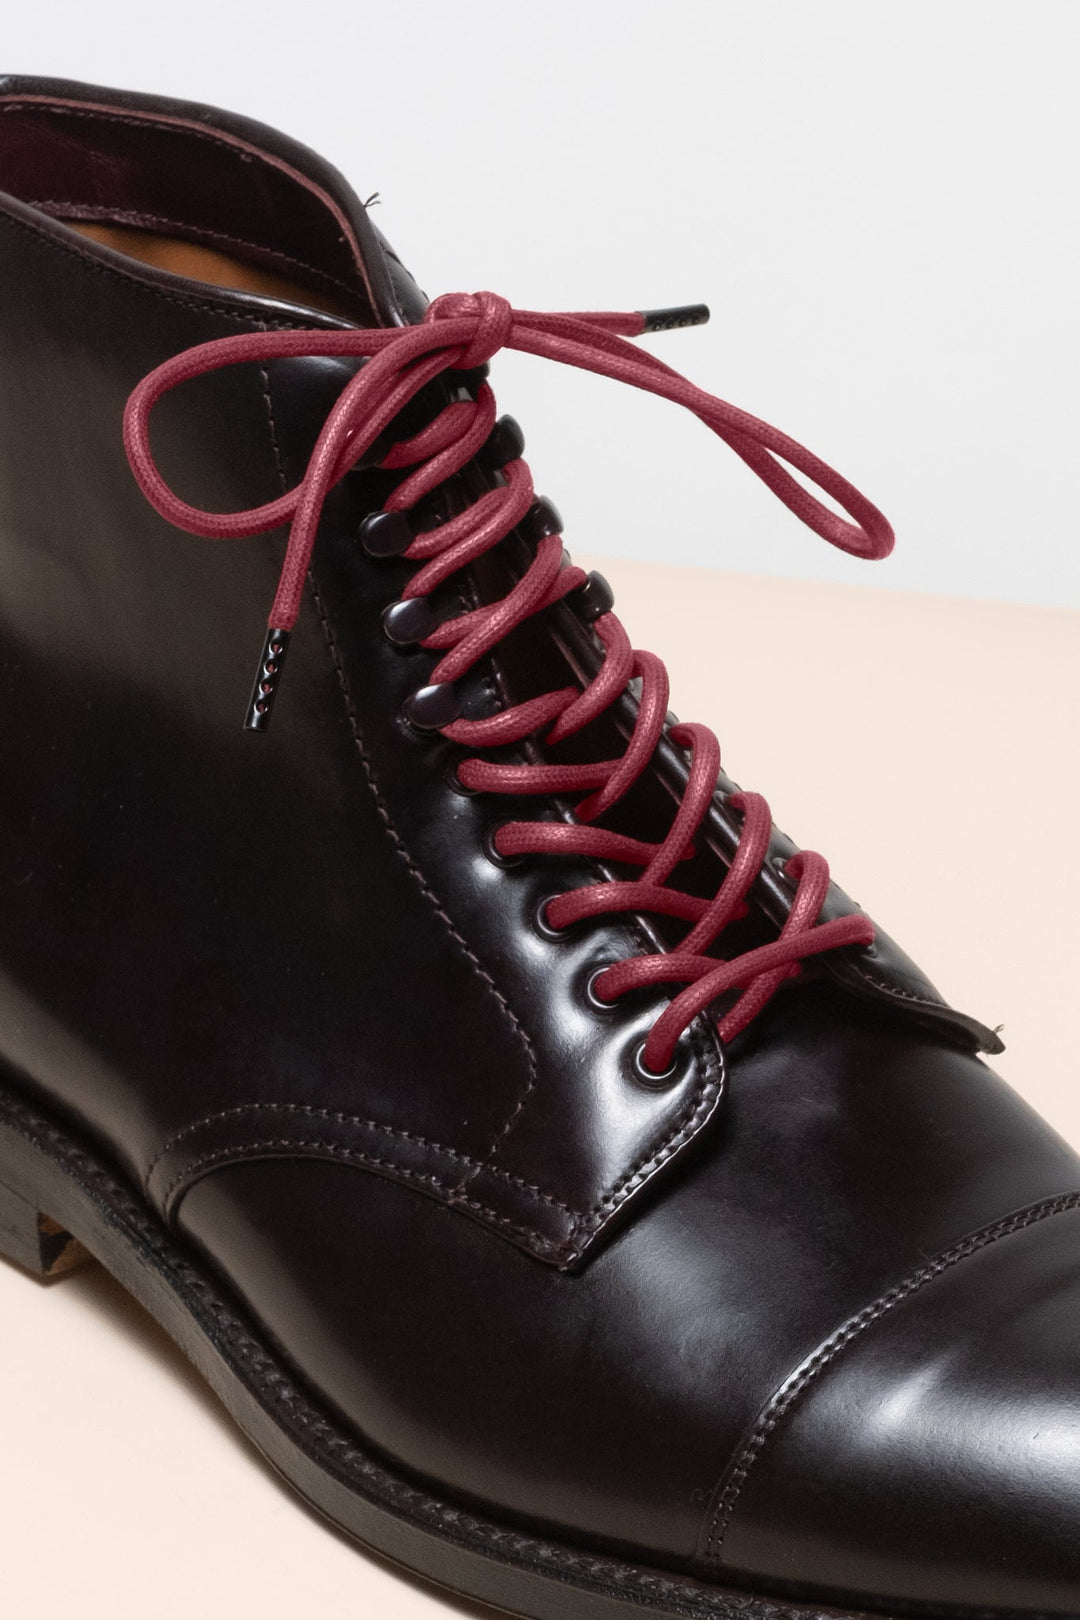 Bordeaux - 4mm round waxed shoelaces for boots and shoes made from 100% organic cotton - Senkels